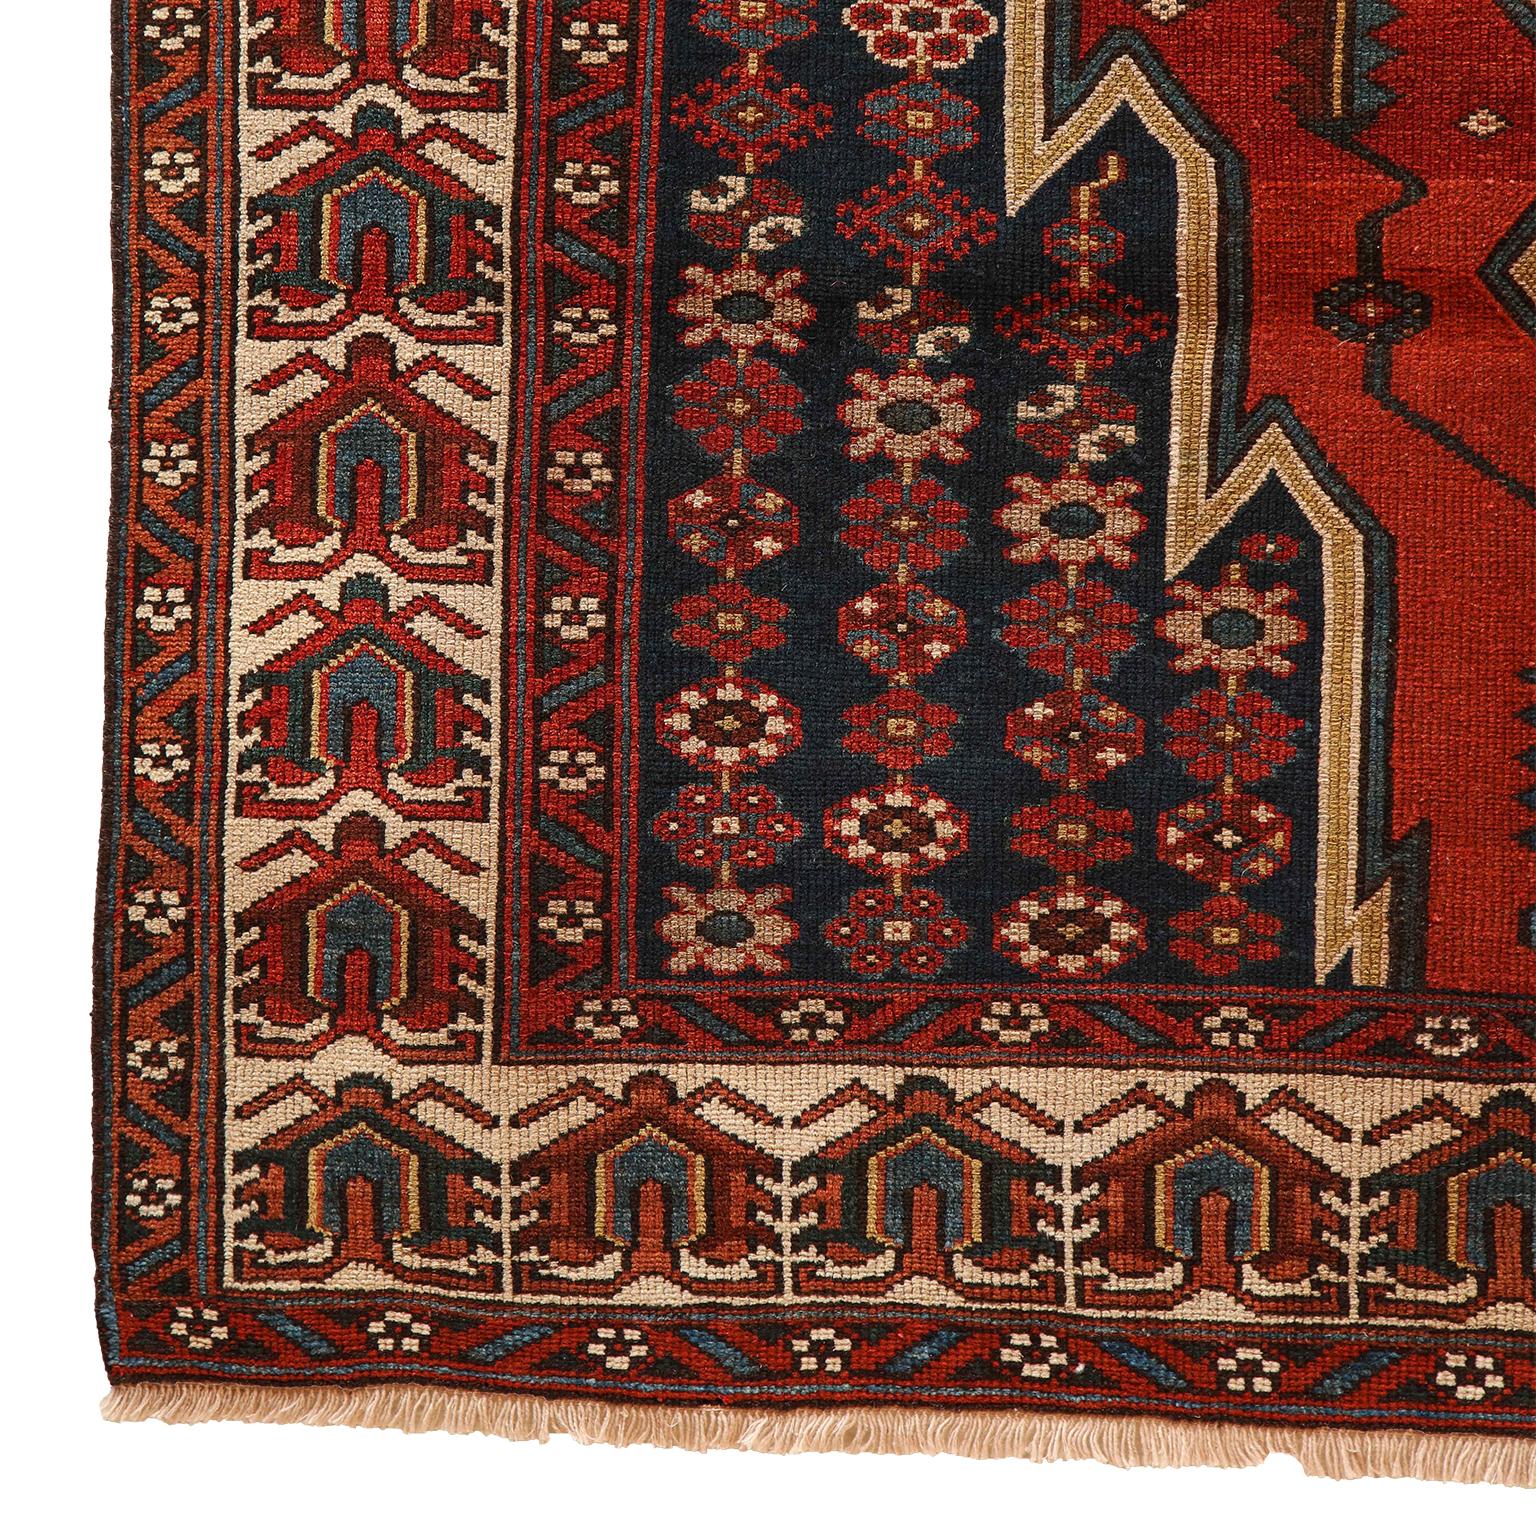 Antique 1920s Wool Persian Mazlaghan Rug, 4' x 6' For Sale 1